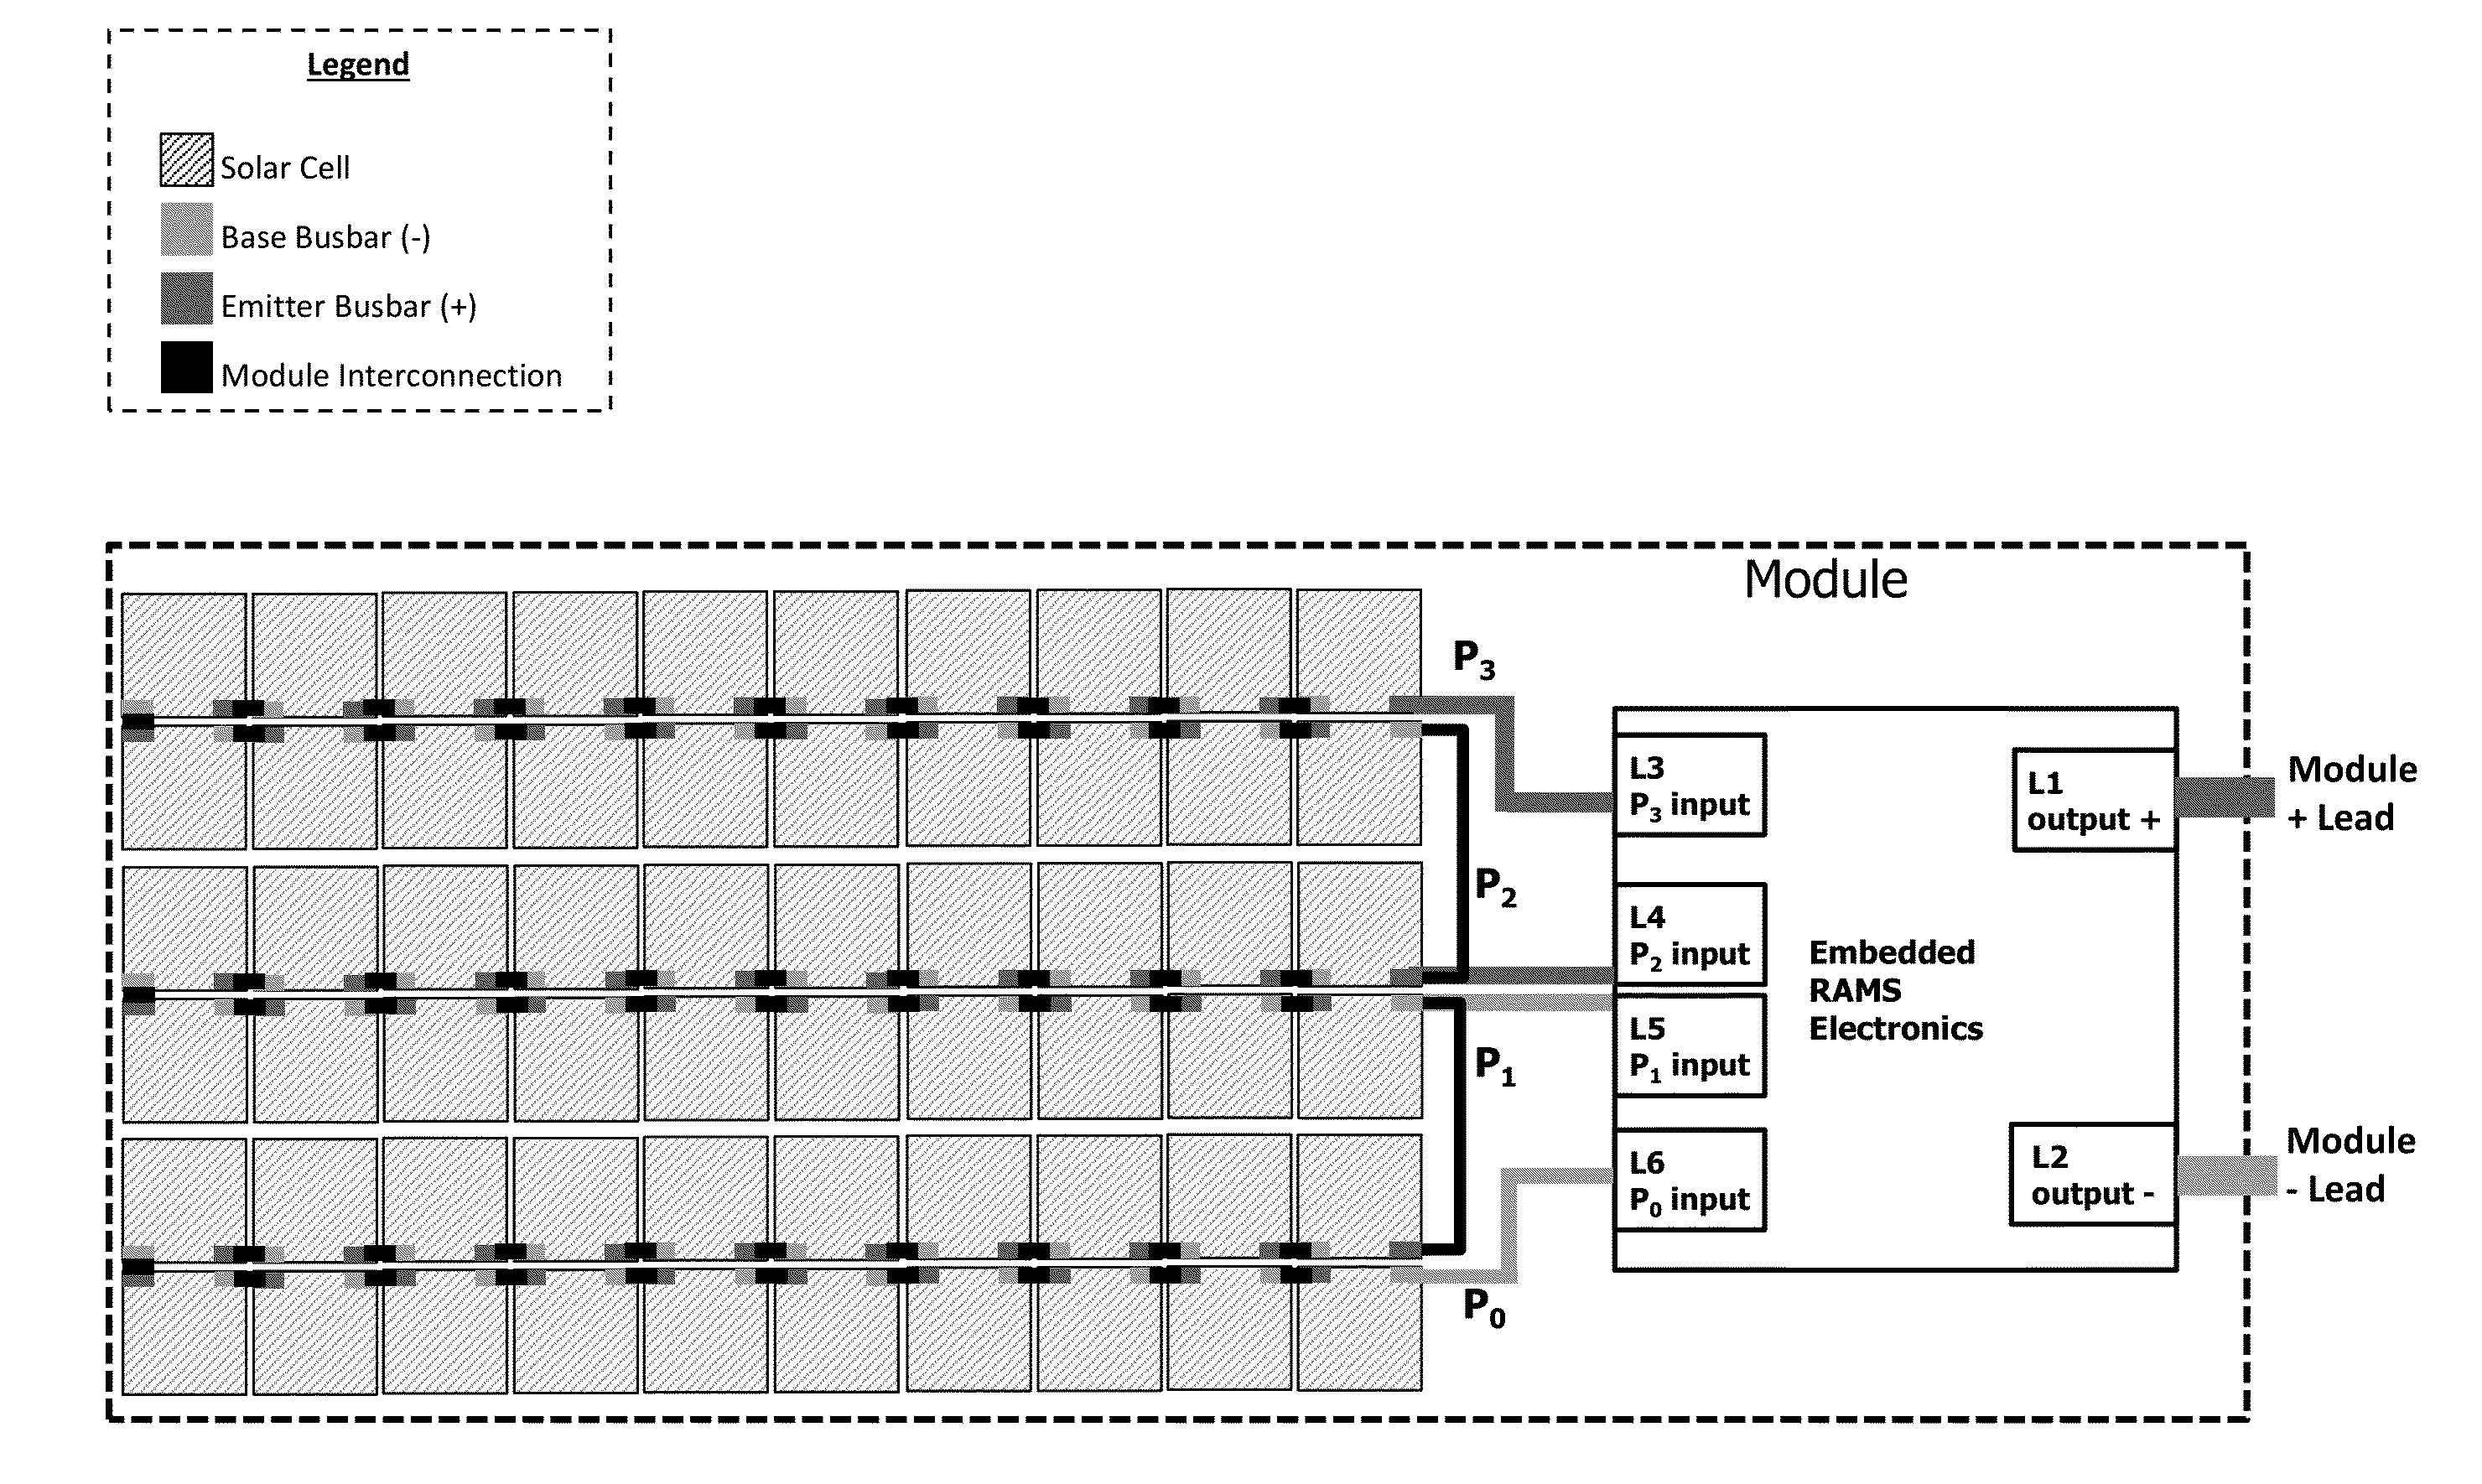 Solar photovoltaic module power control and status monitoring system utilizing laminate-embedded remote access module switch